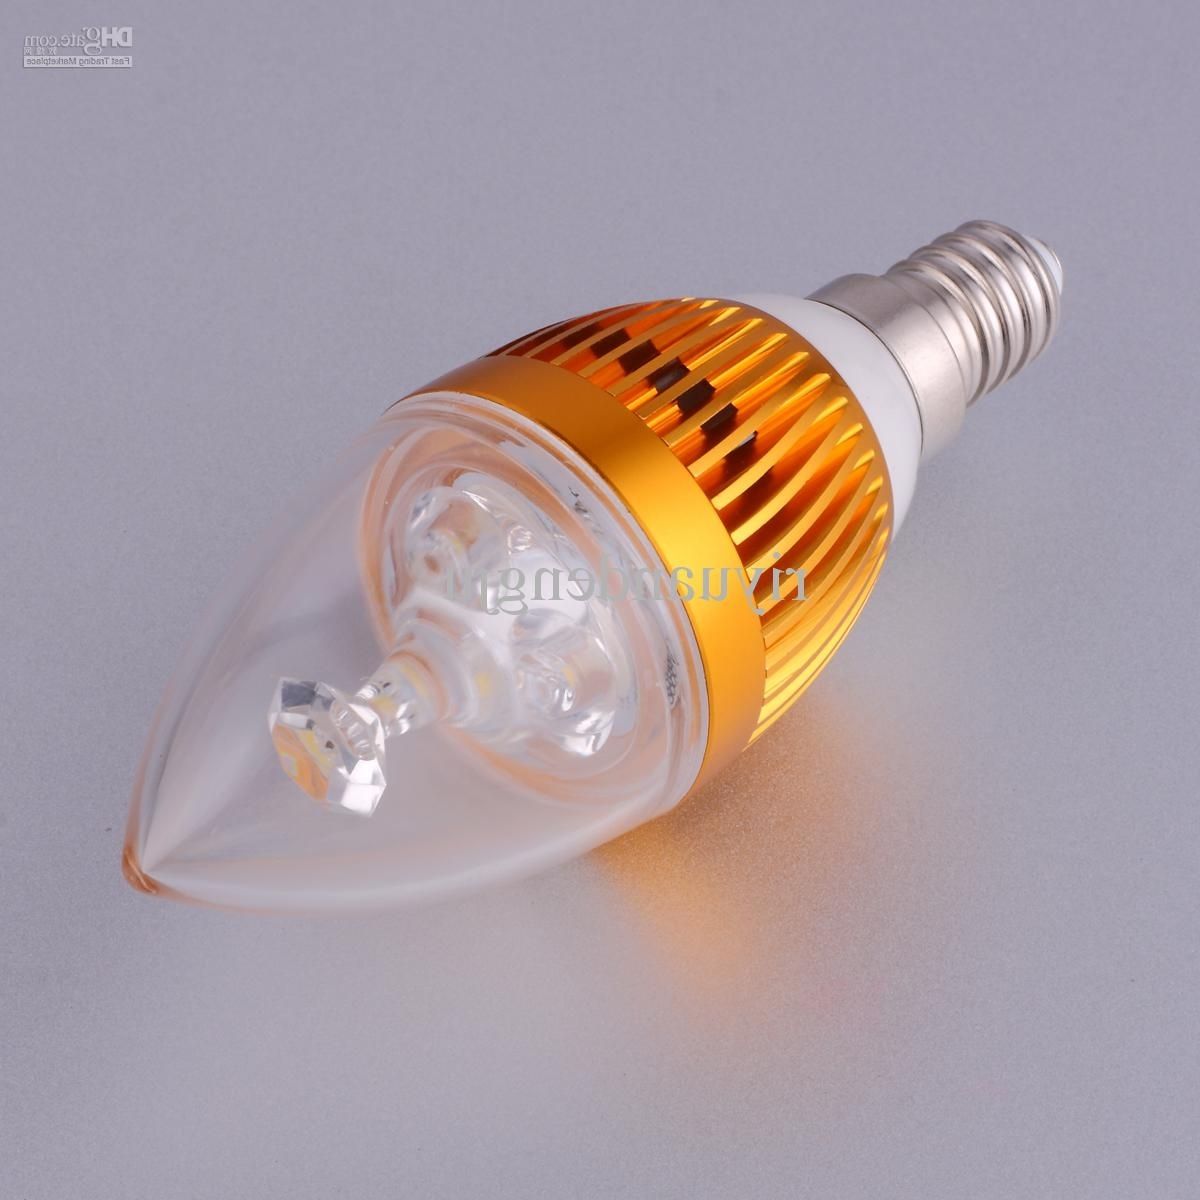 Most Popular Led Bulb Led Candle Light The Chandelier Bulb 3w Energy Saving Lamps Throughout Led Candle Chandeliers (View 6 of 20)